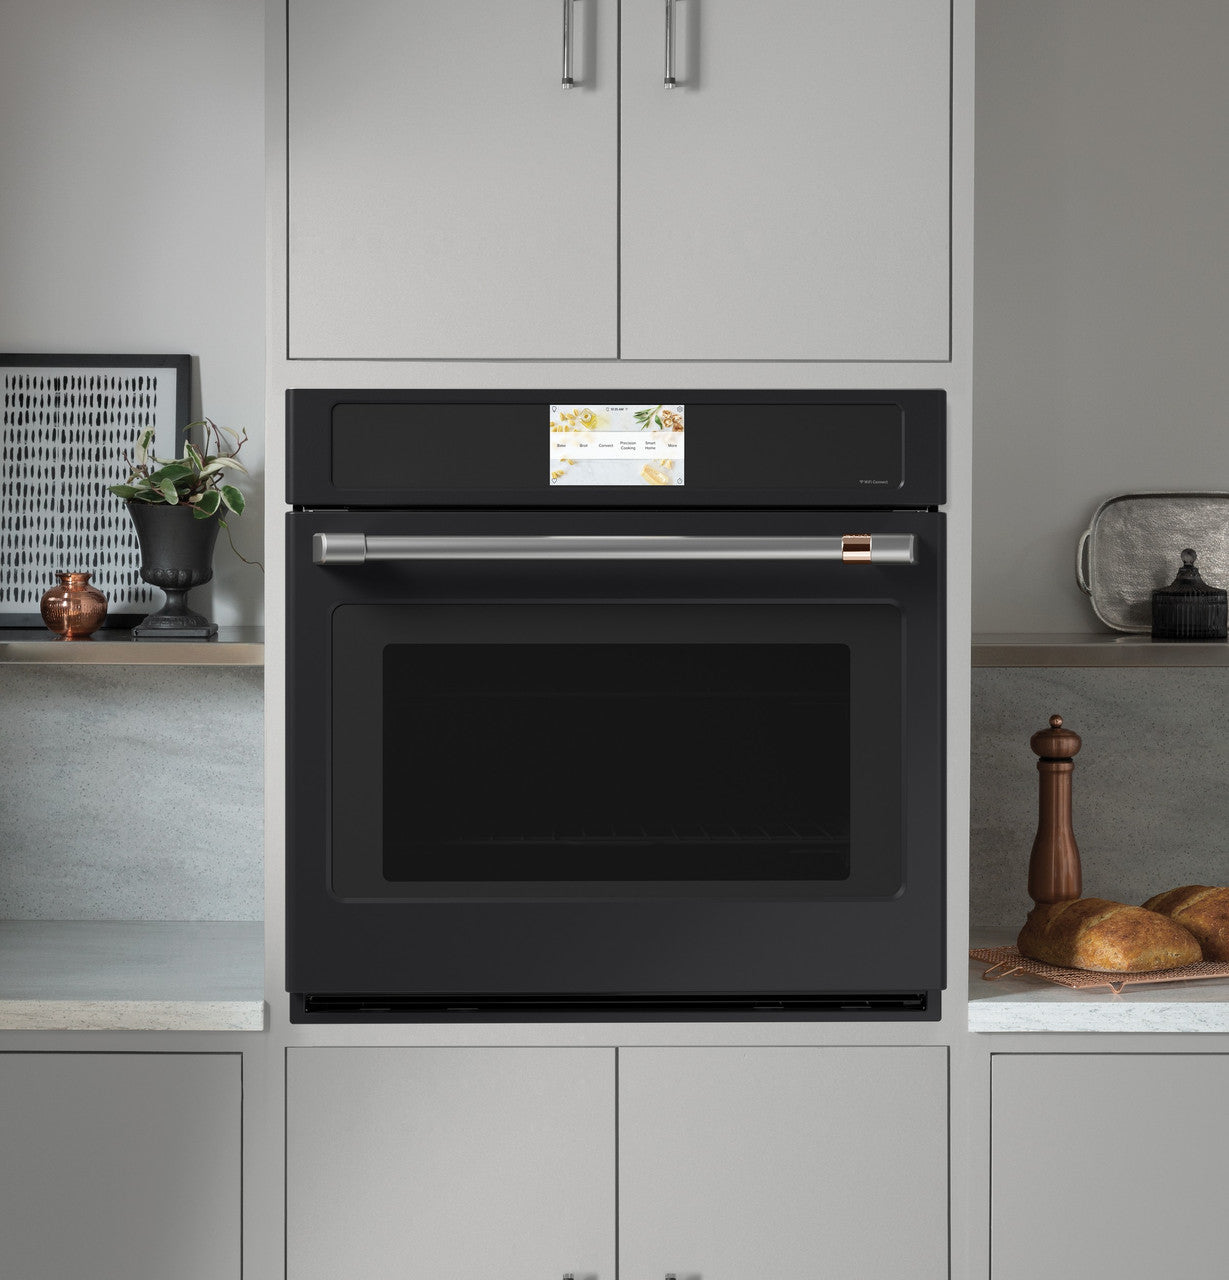 Café - 5 cu. ft Single Wall Oven in Black - CTS90DP3ND1